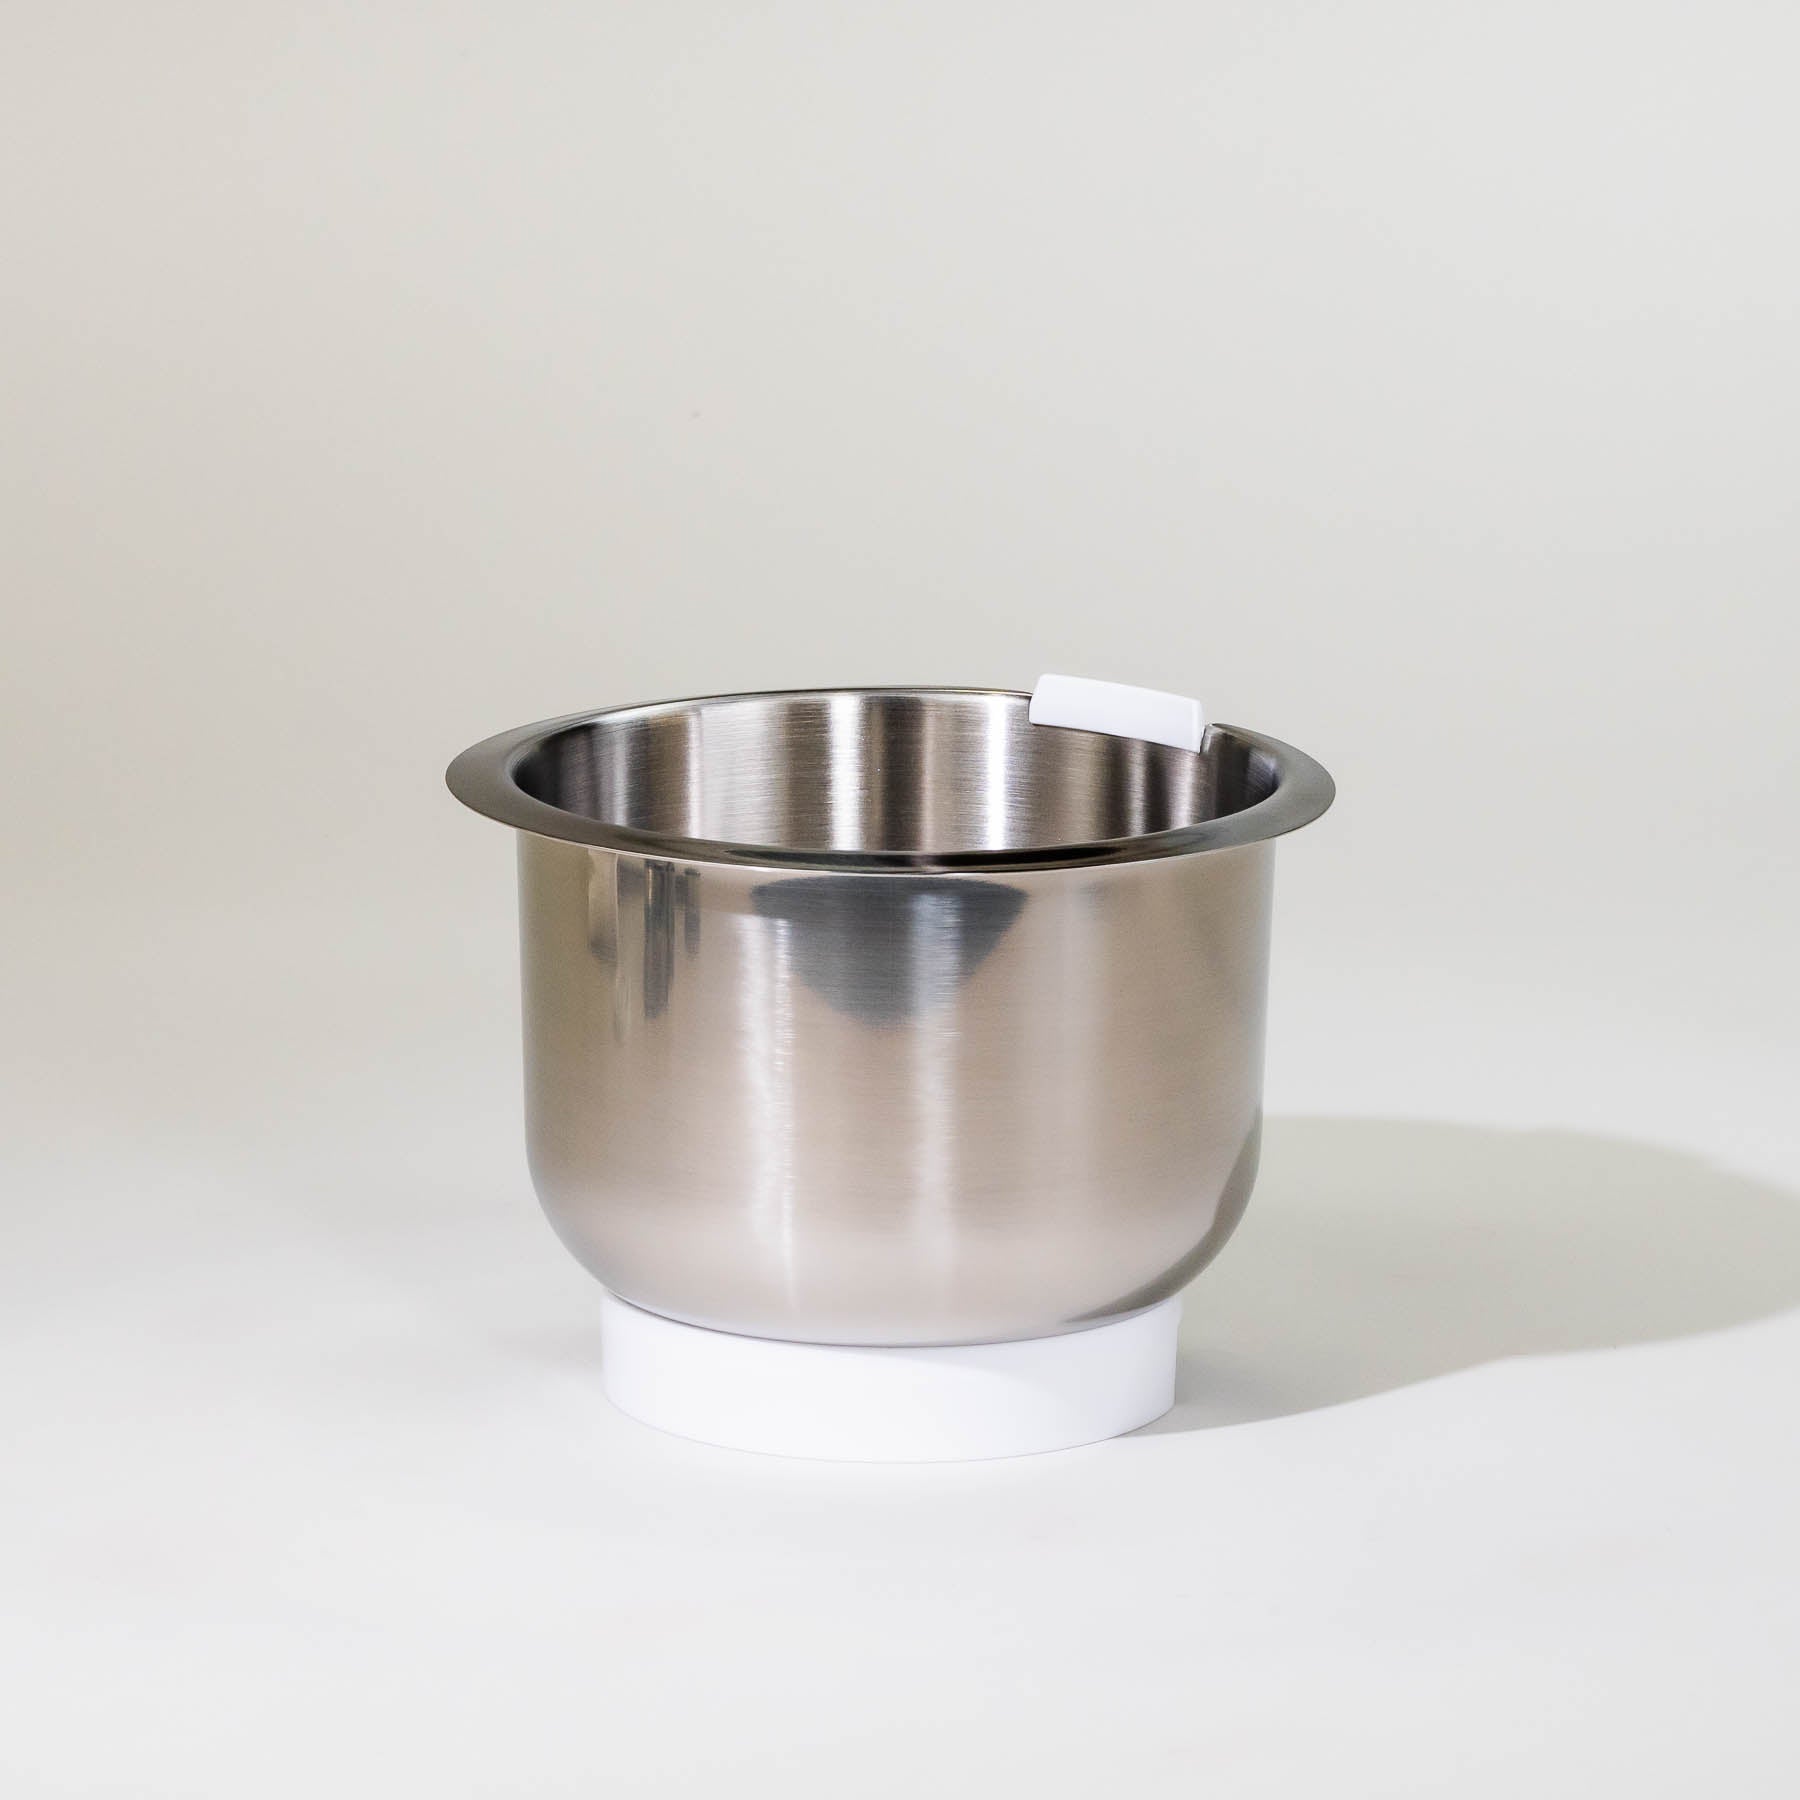 Compact Mixer Stainless Steel Bowl